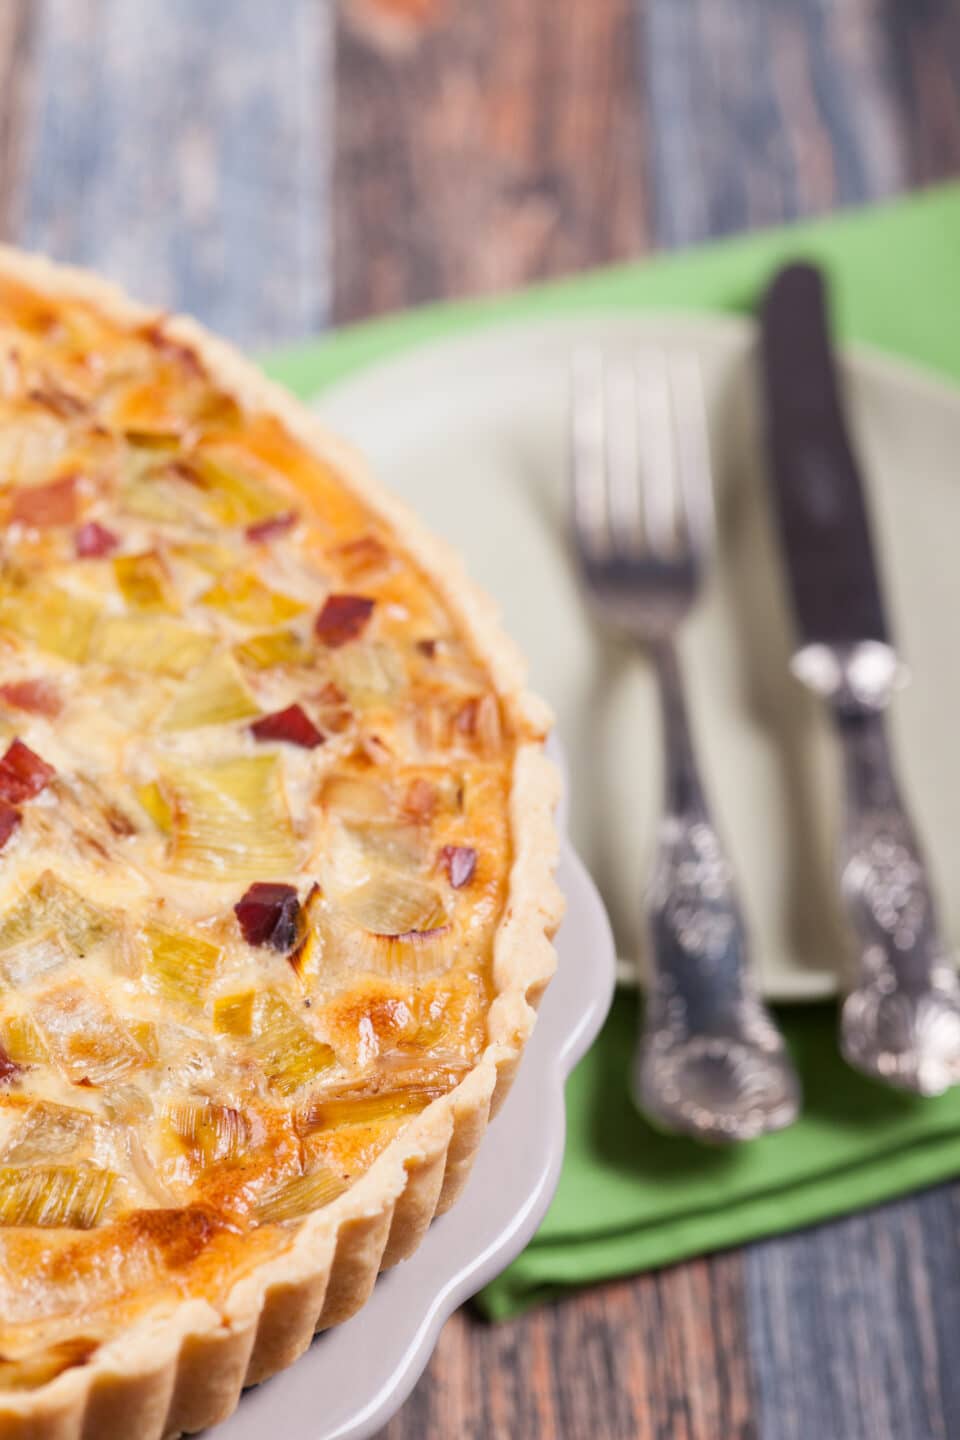 Quiche Lorraine from France